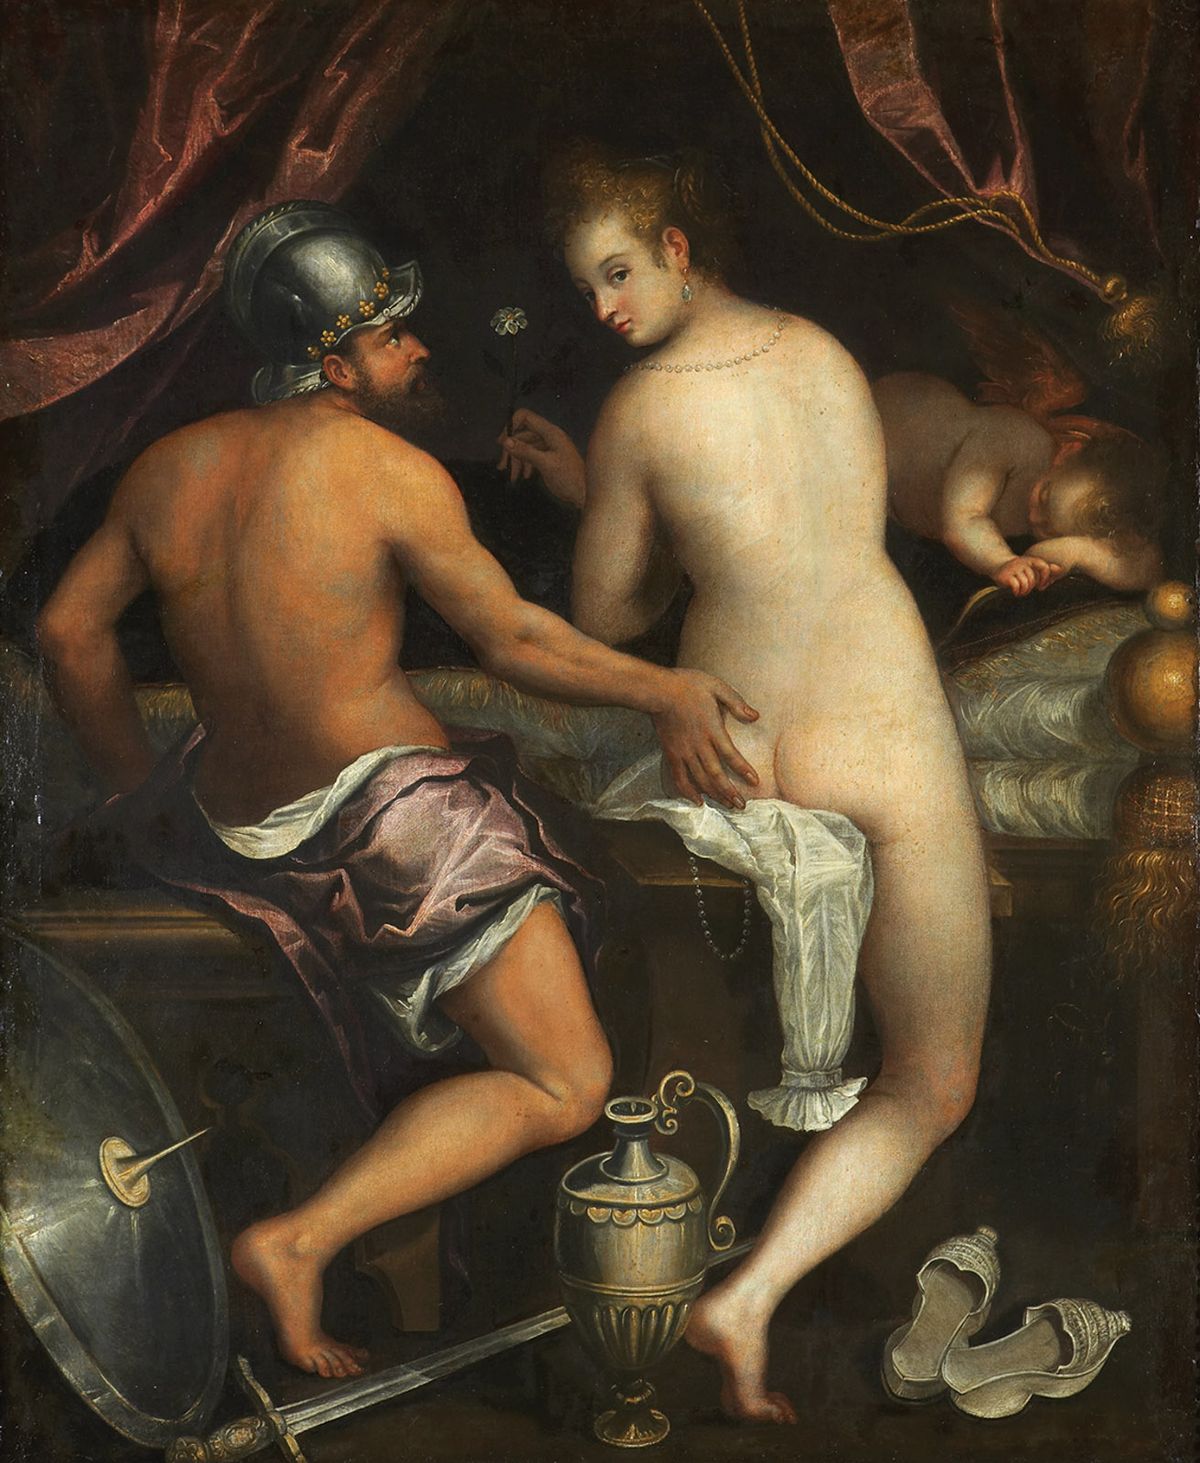 Venus and Mars (1600-10) by the Bolognese artist Lavinia Fontana, who broke the mold for female artists by painting mythological nudes © Fundación Casa de Alba